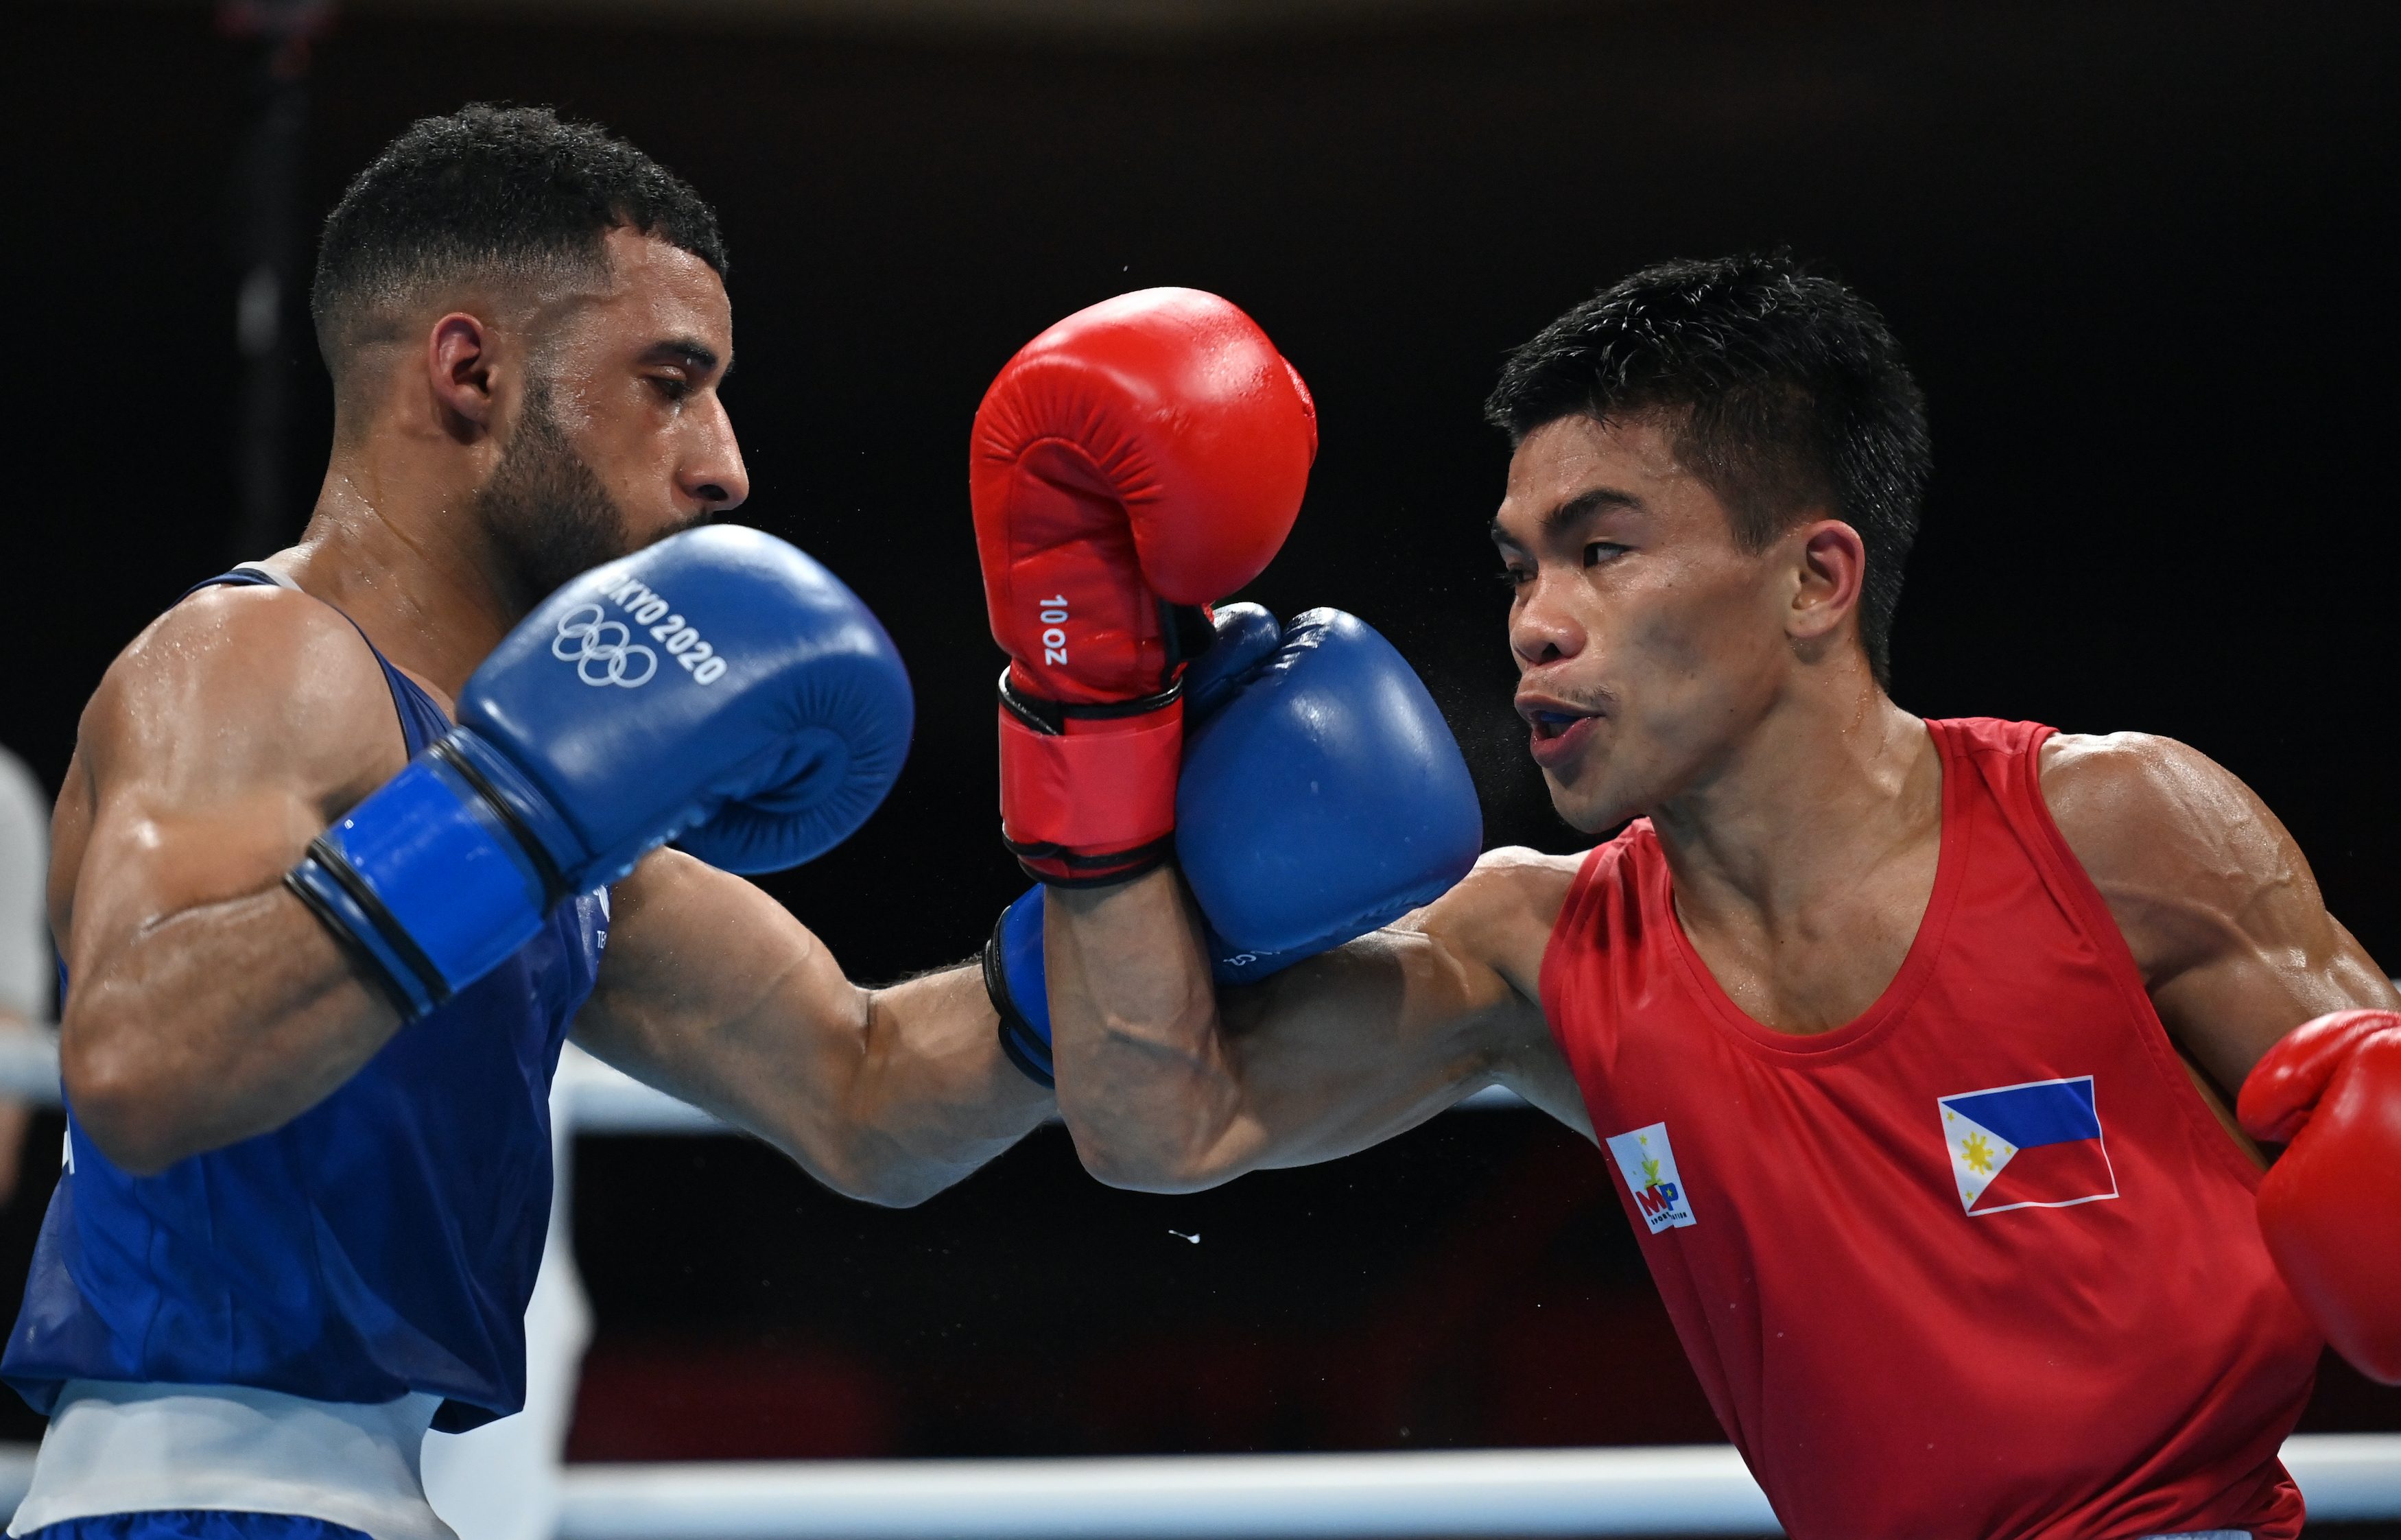 Carlo Paalam ‘grateful’ for knockdown in Olympic loss as he turns focus on Paris